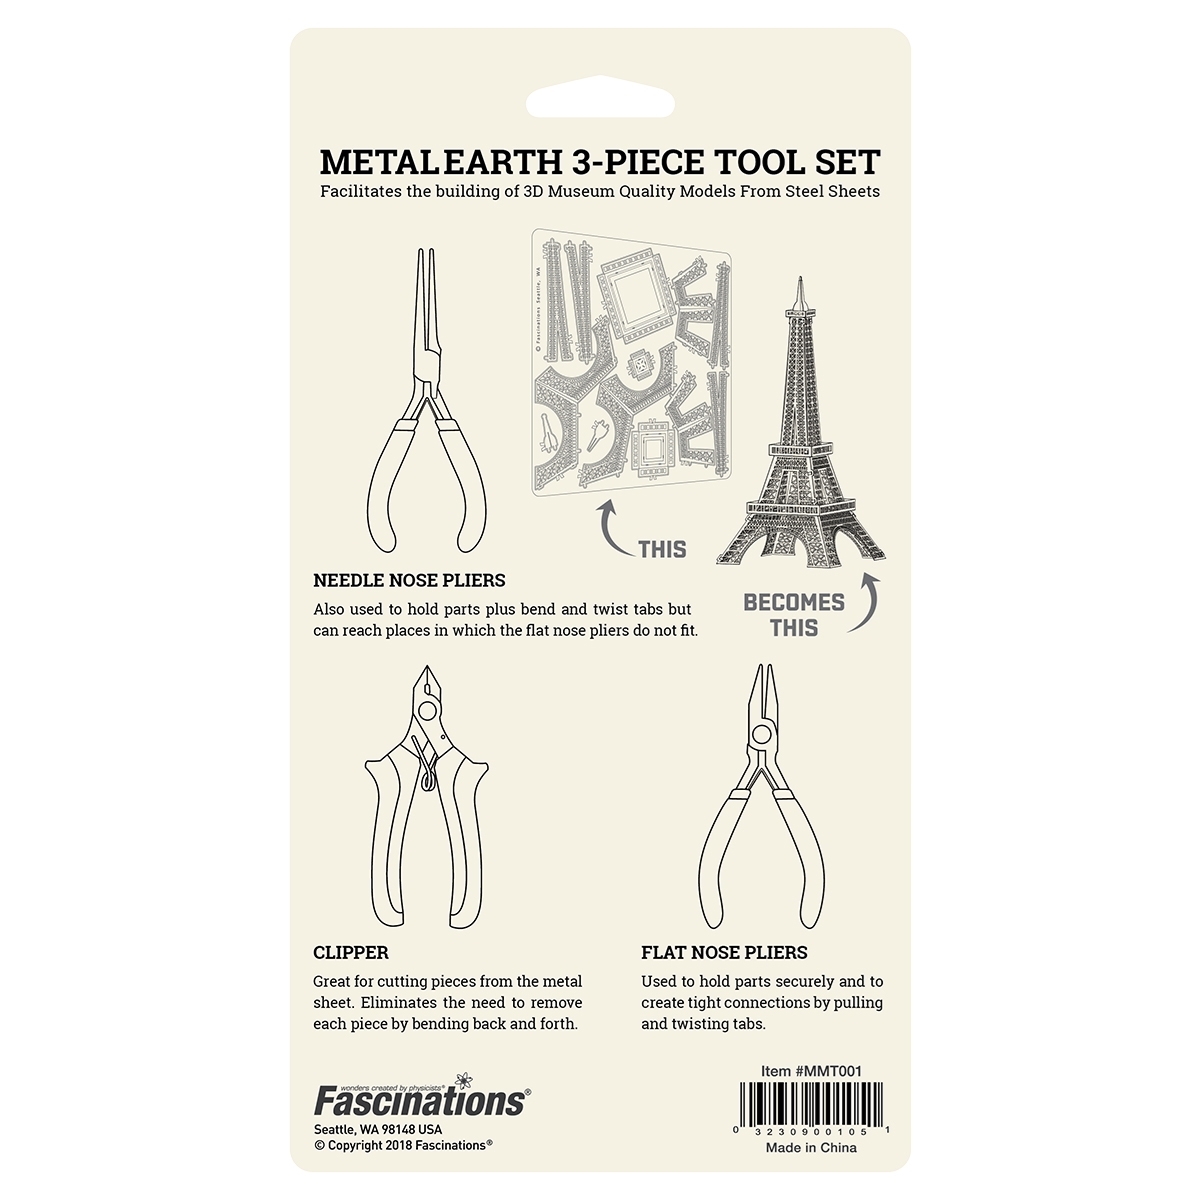 Metal Earth Tool Kits Comparison - Ordered the newer Enhanced two-piece  kit then found the original three-piece kit for less than $10 and grabbed  it. BUT, really disappointed in the quality of